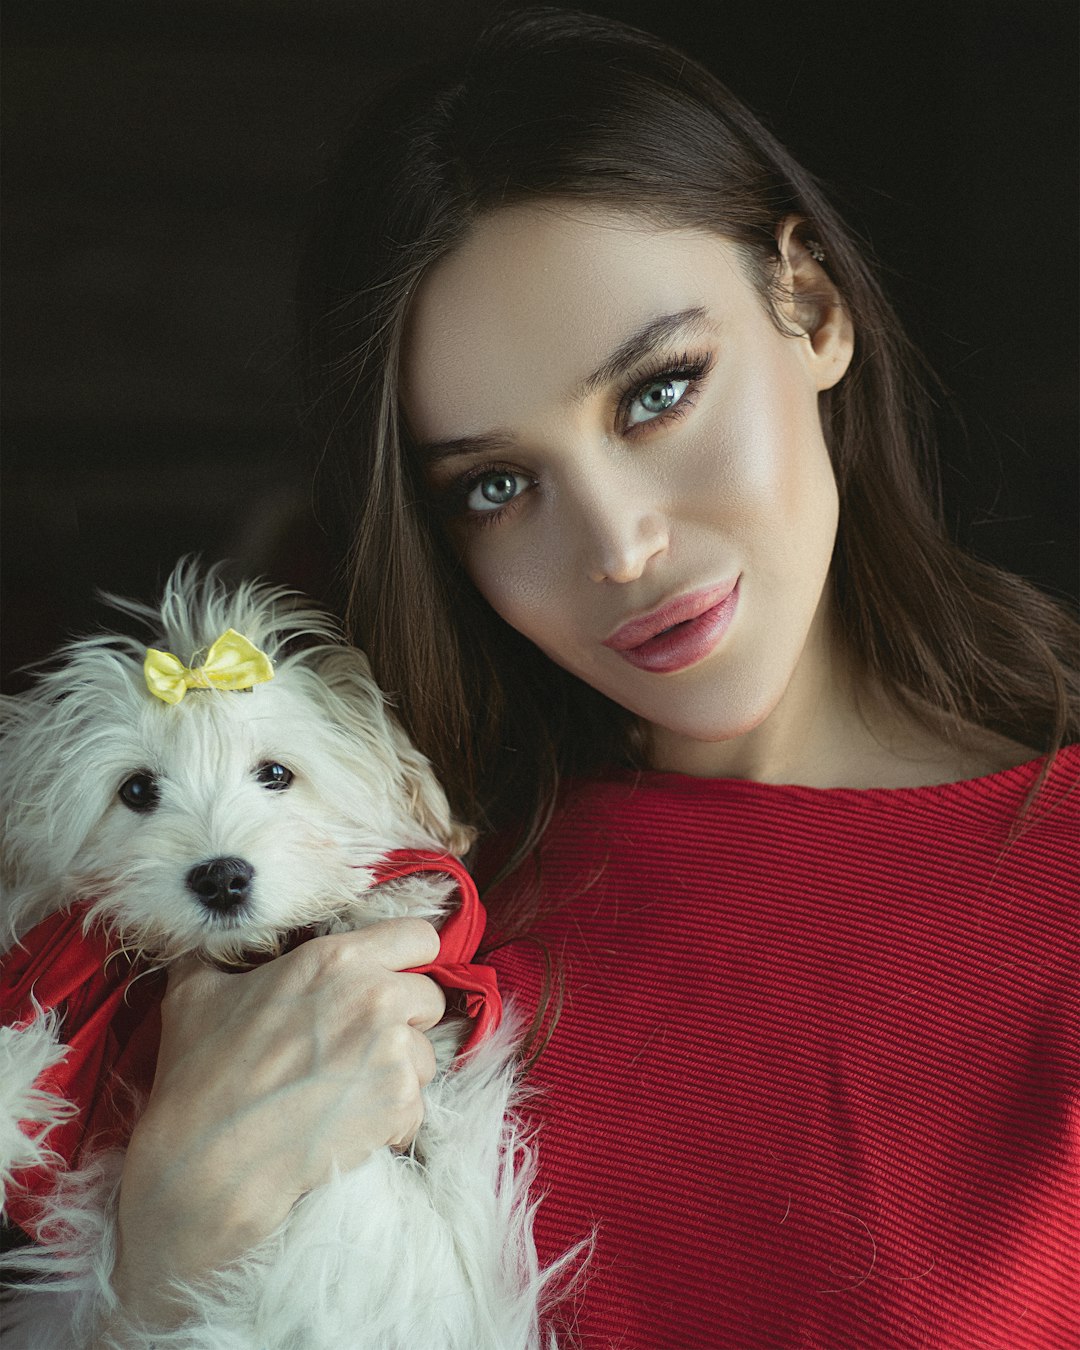 woman in red turtleneck sweater holding white long coated small dog